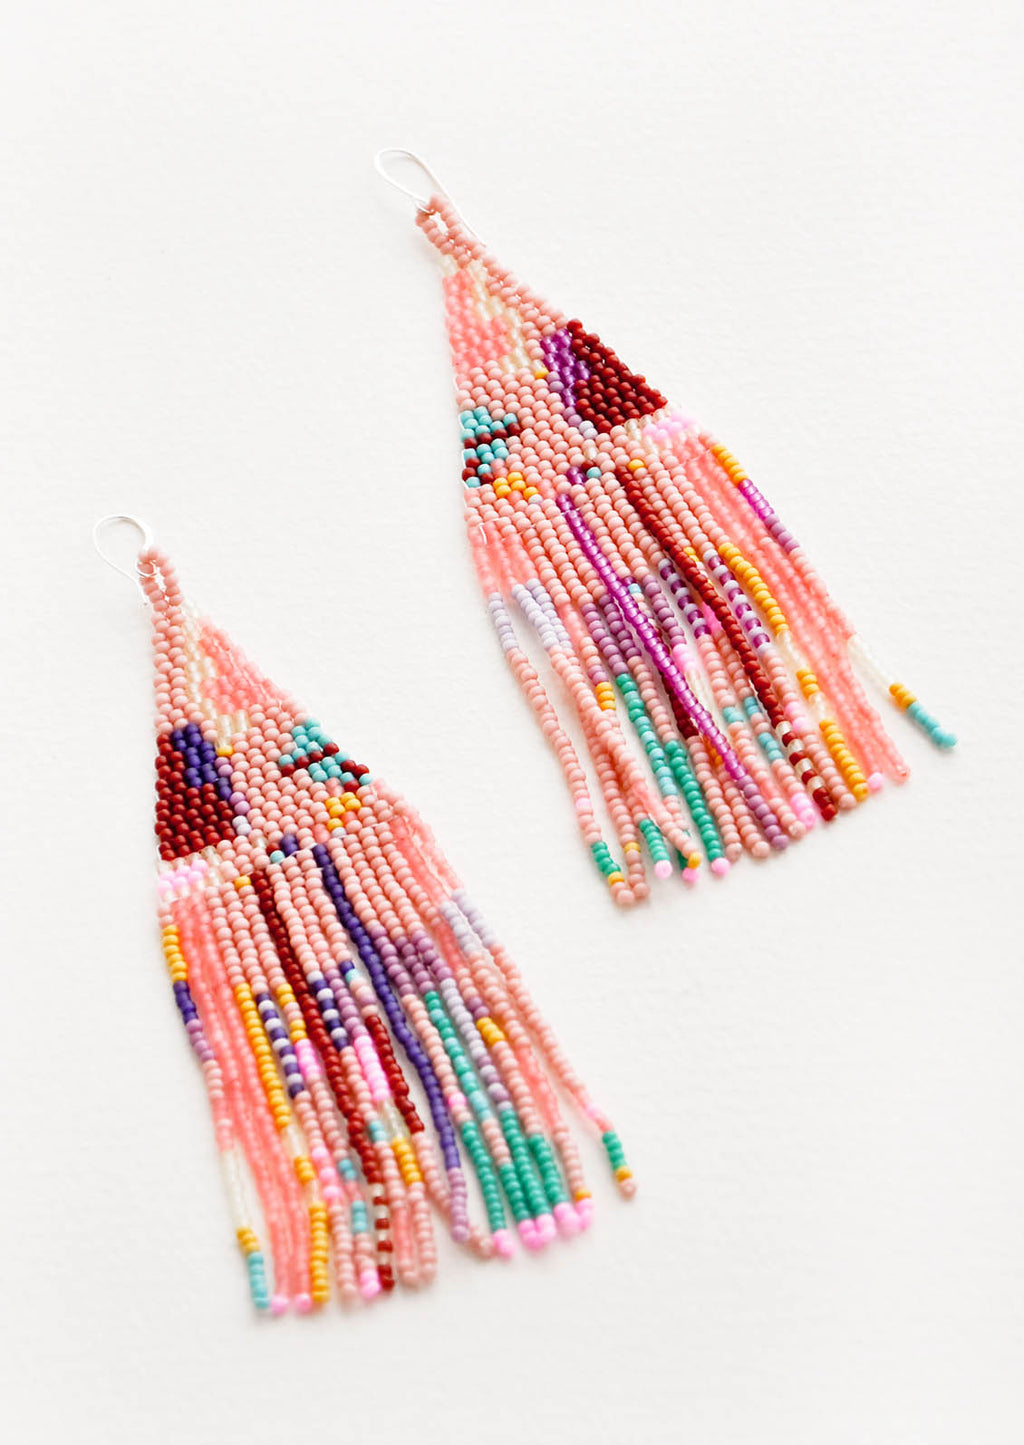 1: Pink fringe beaded earrings with irregular sections of blue, green, purple, maroon, yellow, and orange. 